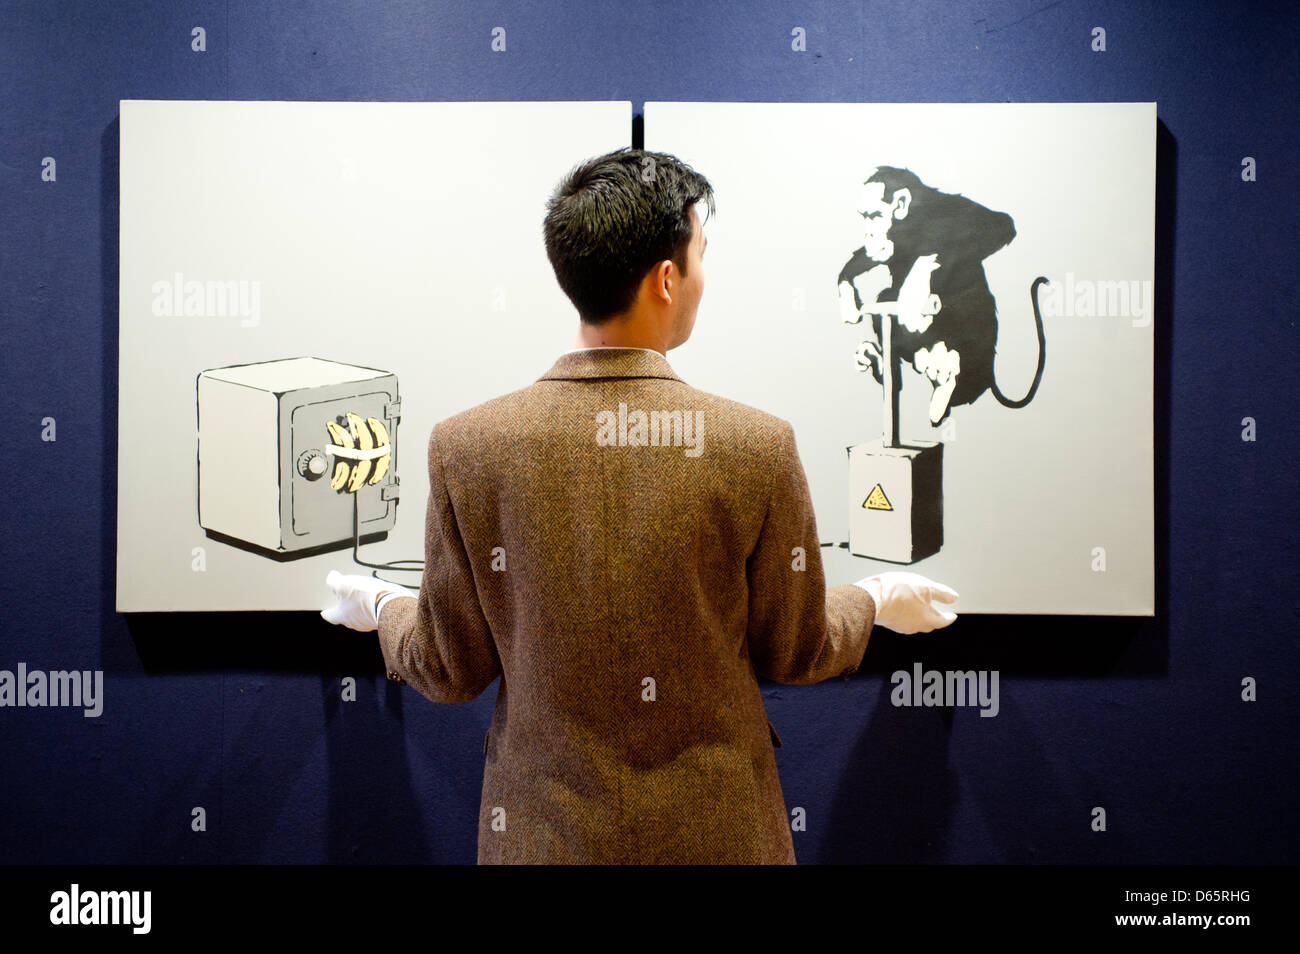 London, UK. 12th April 2013. a sales assistant holds a diptych canvas entitled “Monkey Detonator” by Banksy during the 'Urban Art' auction preview at Bonhams. The work displays his typical sense of surrealist humour. Measuring 152 by 76 cm., this painting carries an estimate of £70,000-100,000. Credit: Piero Cruciatti / Alamy Live News Stock Photo